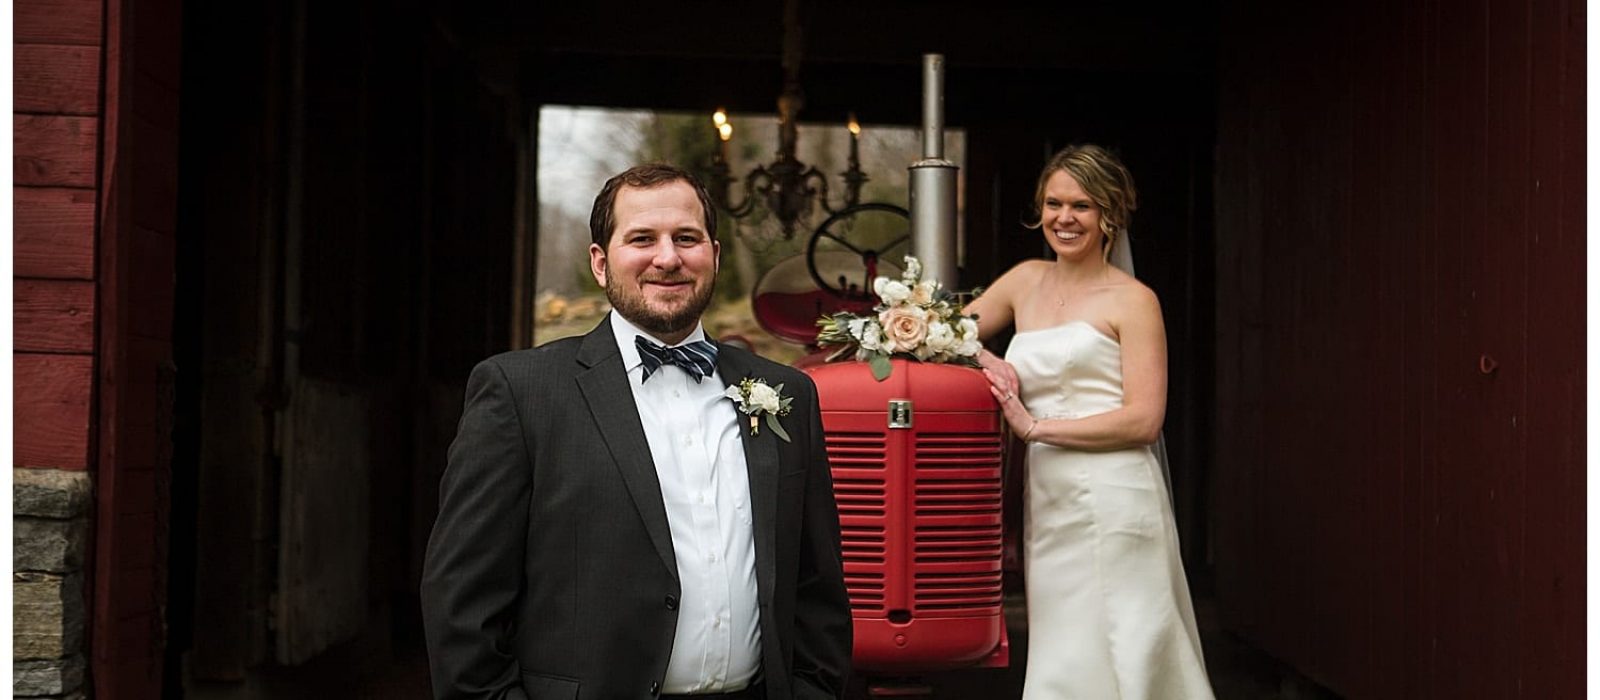 Bride and groom posing beside red rustic tractor, bride leaning against tractor smiling at groom while groom stands in front of tractor with hands in his pockets smiling and looking at camera